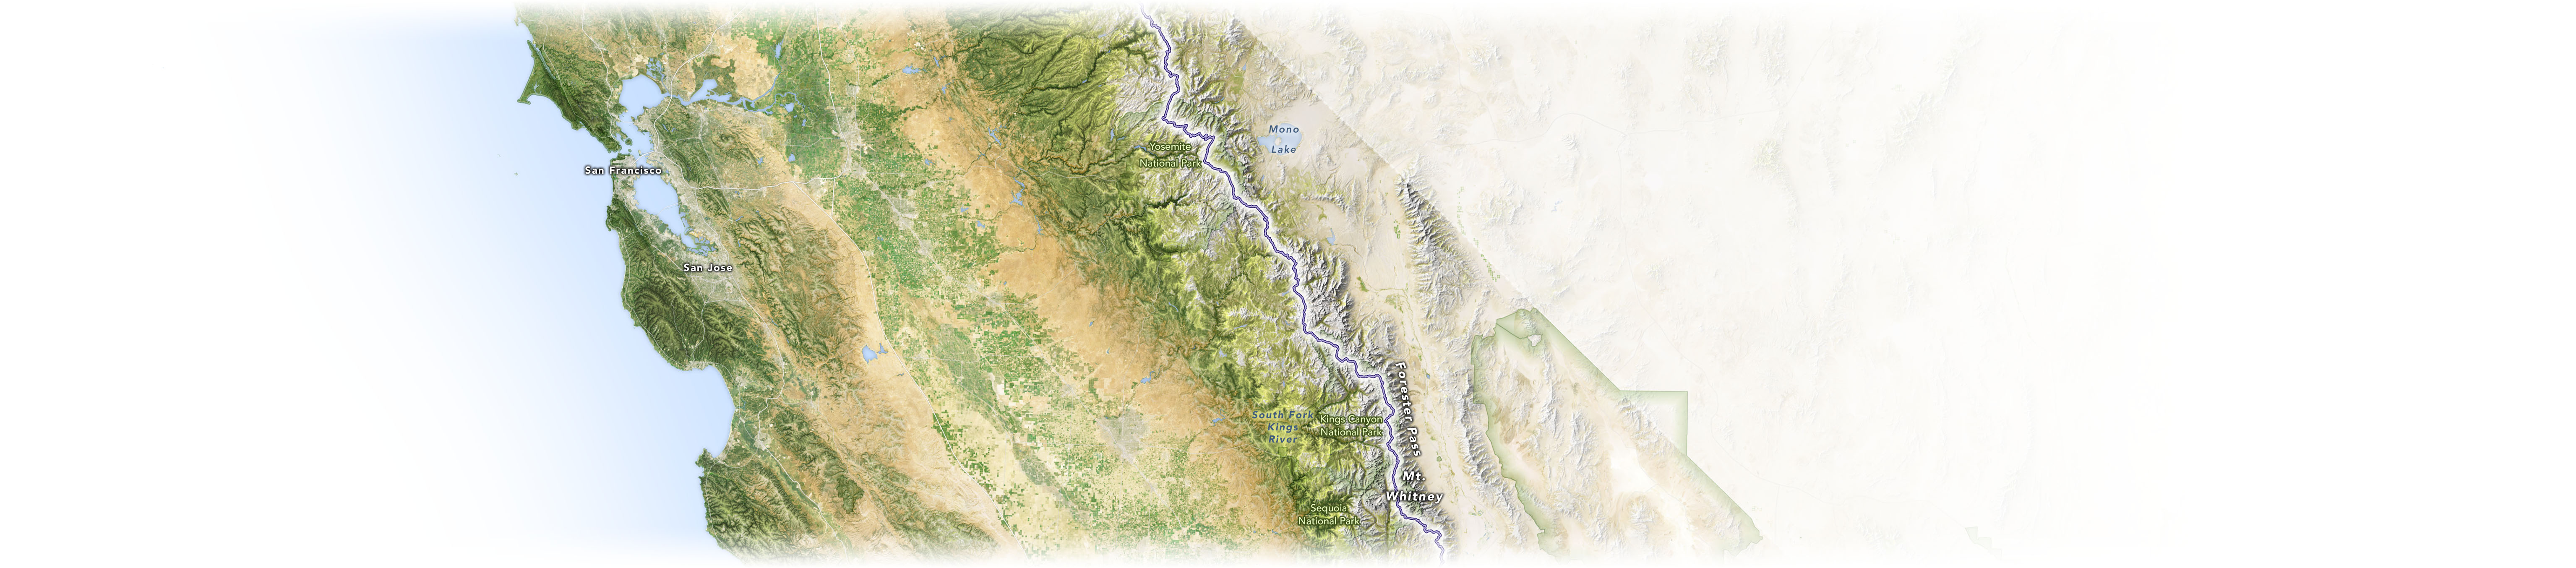 A map of the Pacific Crest Trail and nearby landmarks in central California.